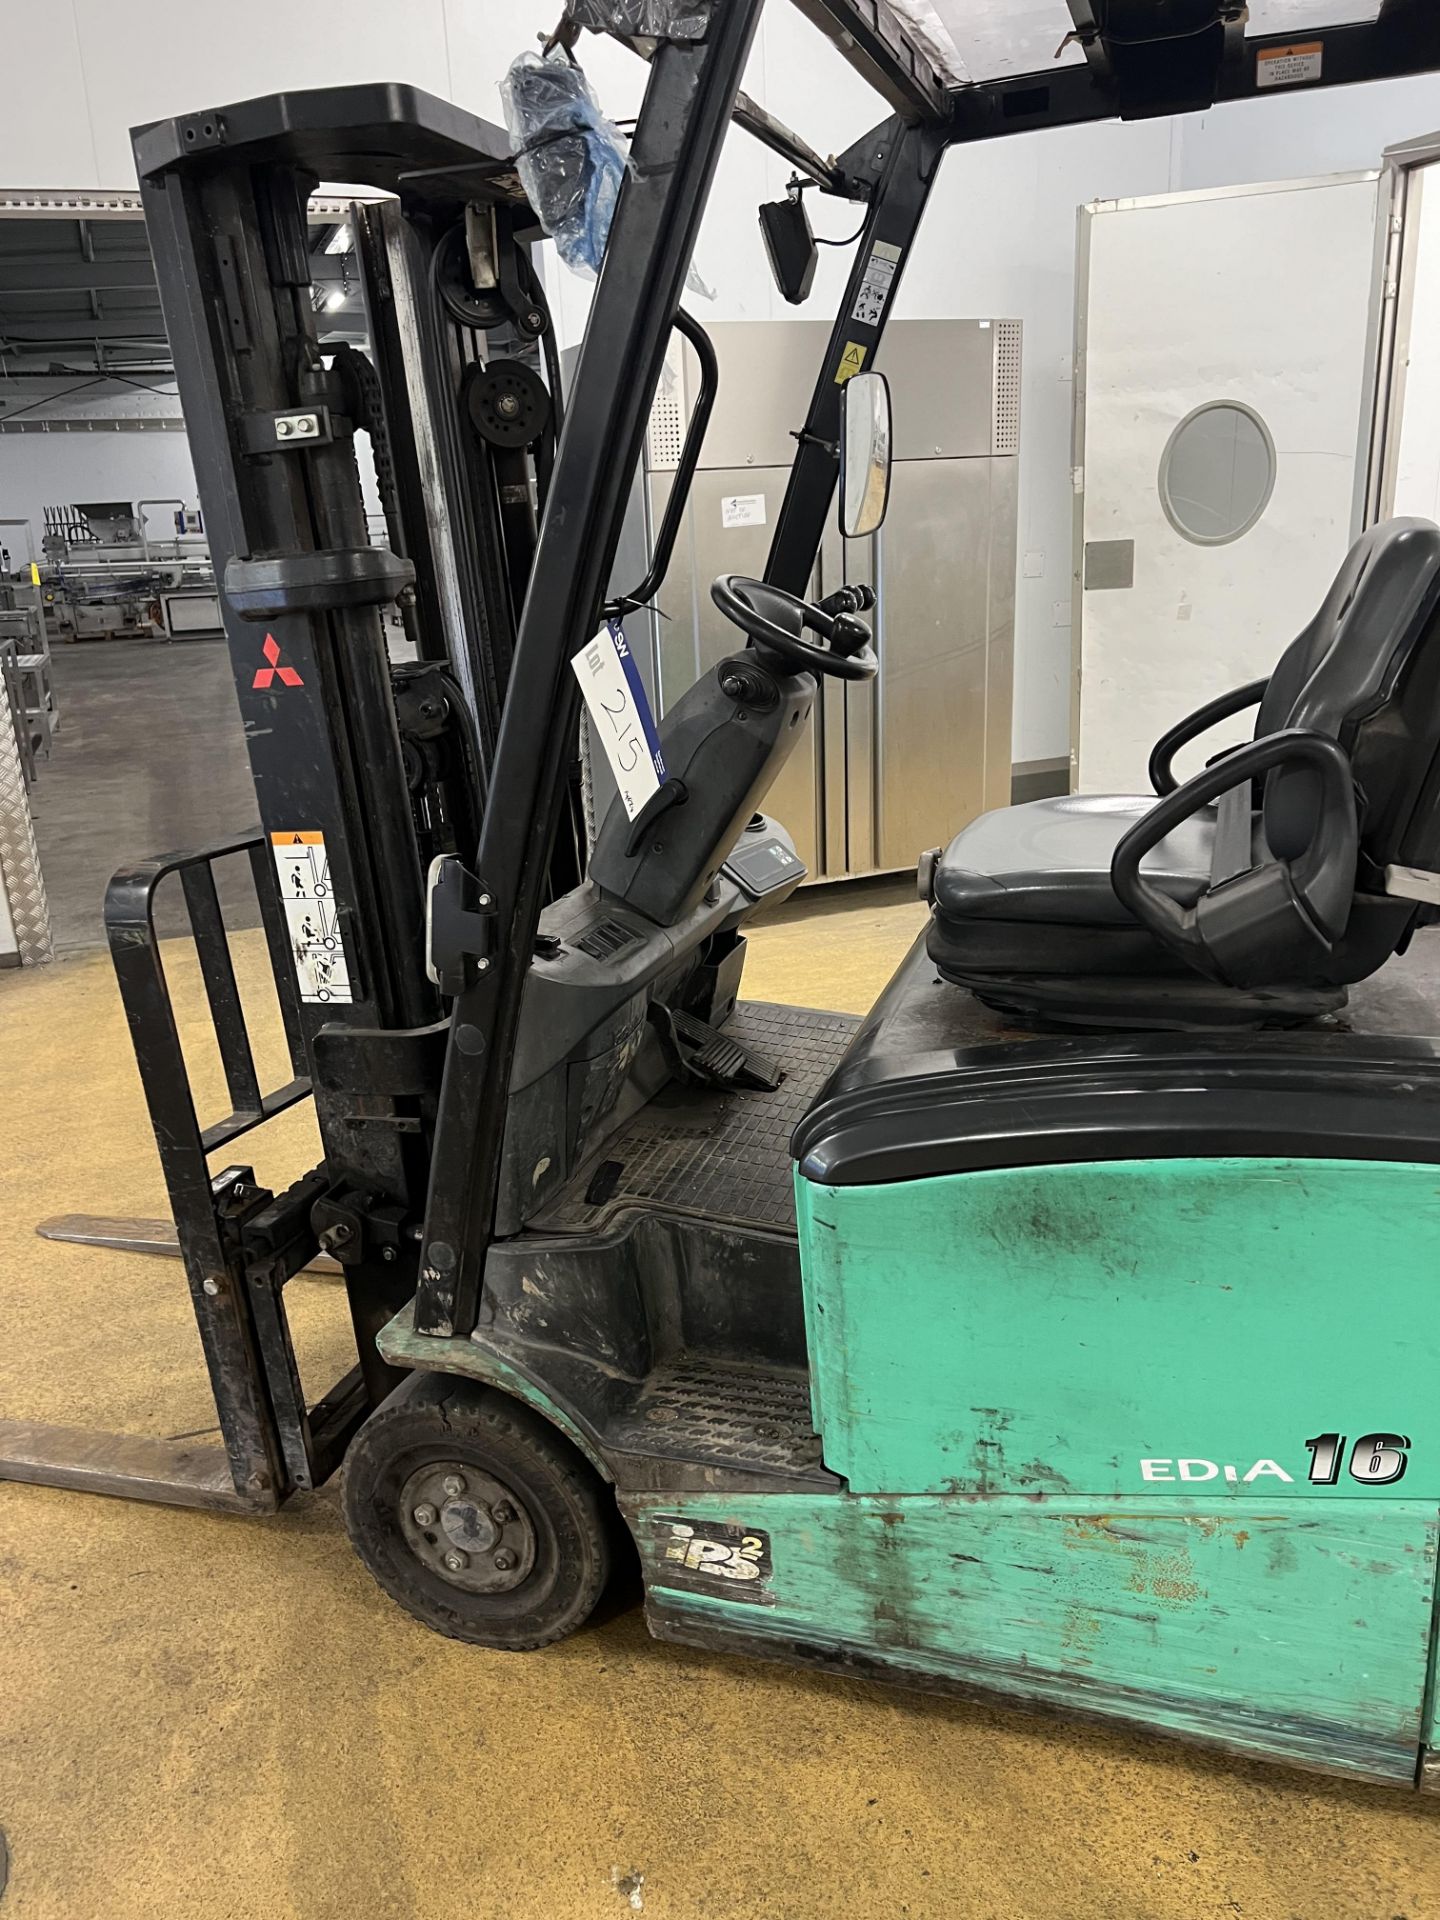 Mitsubishi FB16CPNT 1600kg cap. Electric Fork Lift Truck, serial no. EFB22 02177, with battery - Image 12 of 12